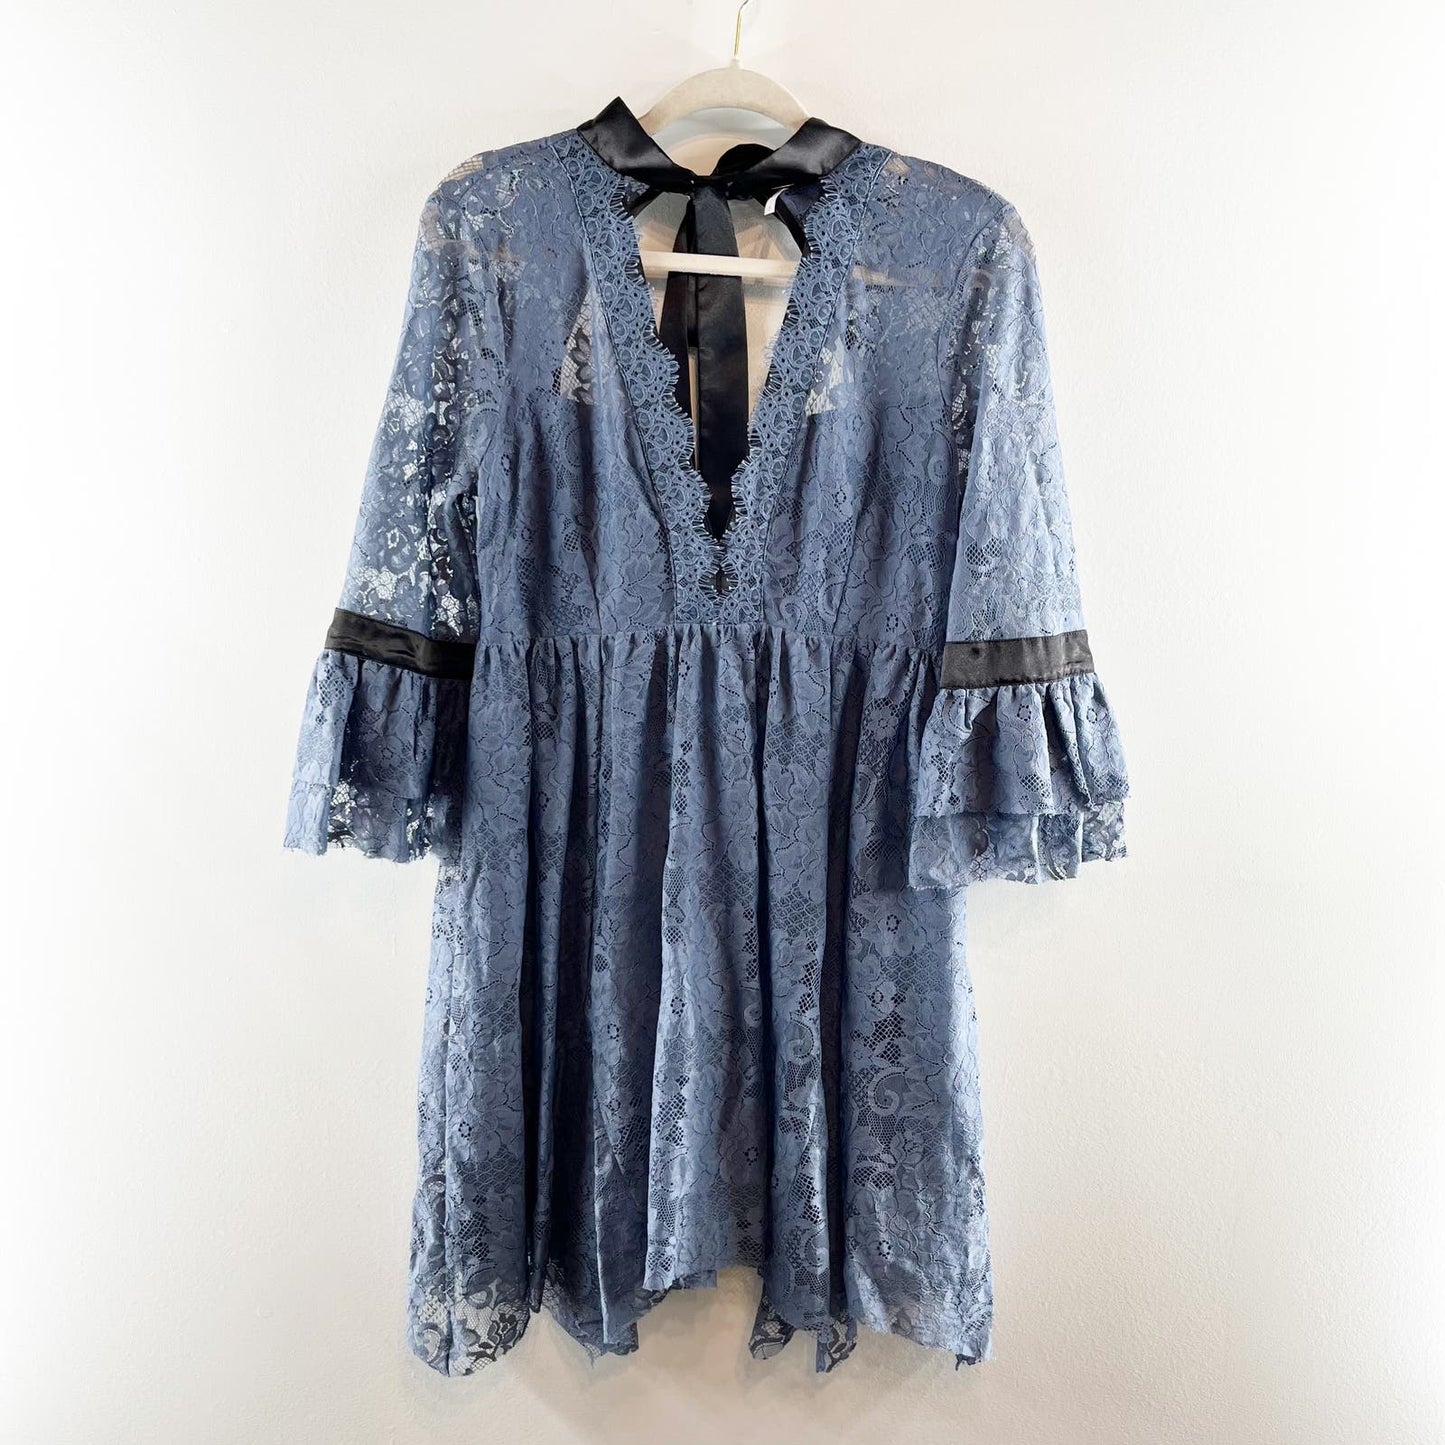 Free People Gilded Lace Victorian Mini Dress Dusty Blue Small